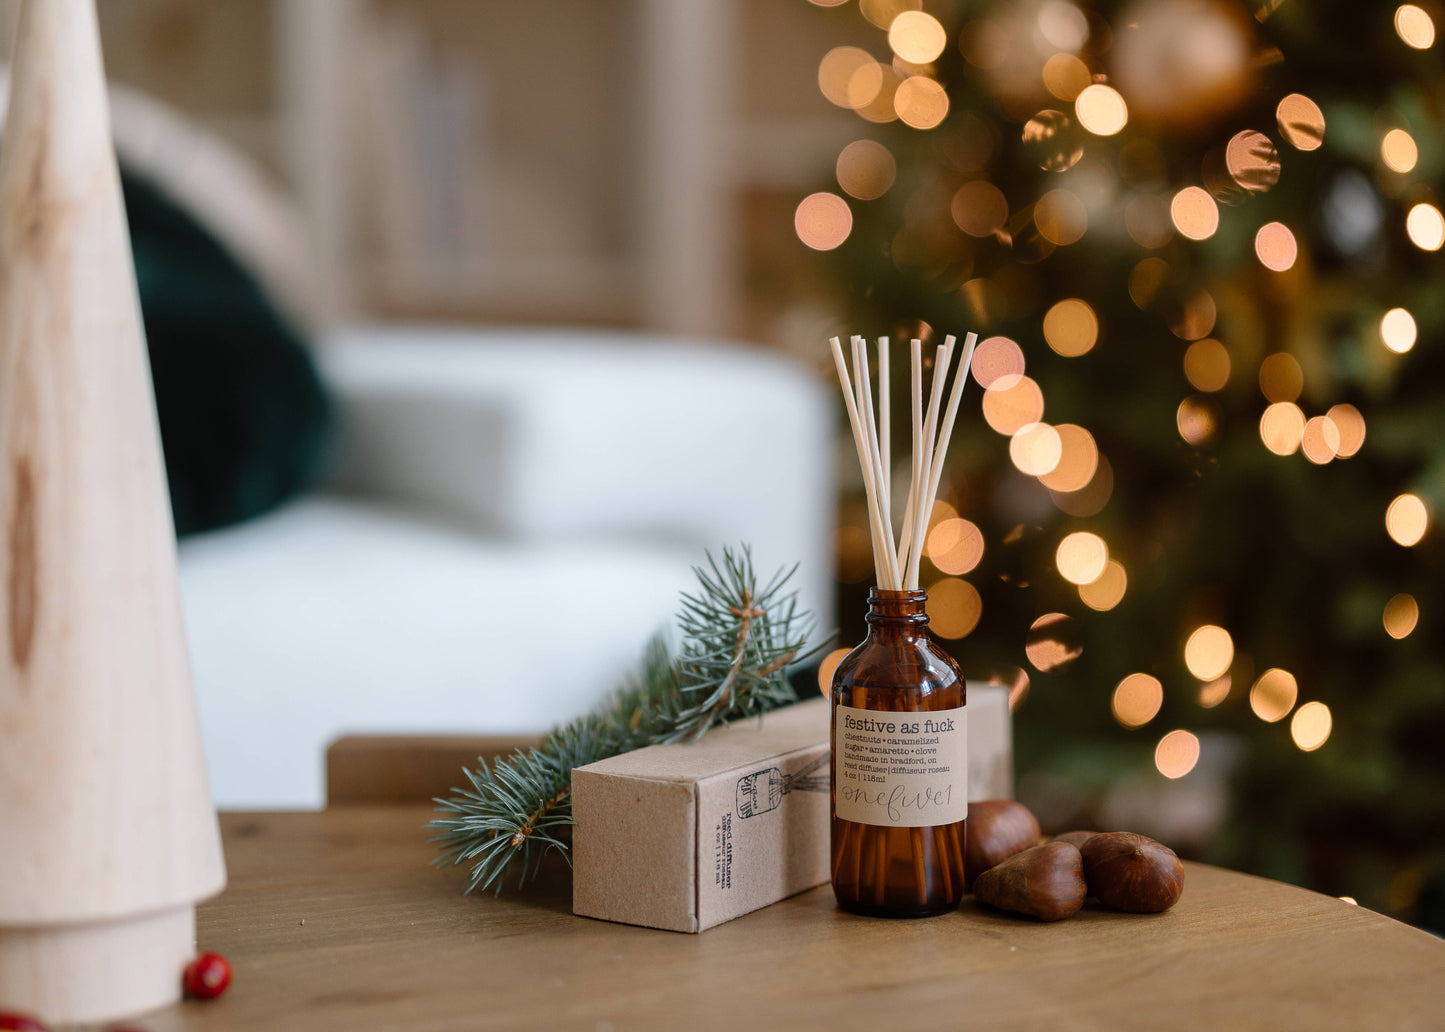 Festive as Fuck | REED DIFFUSER